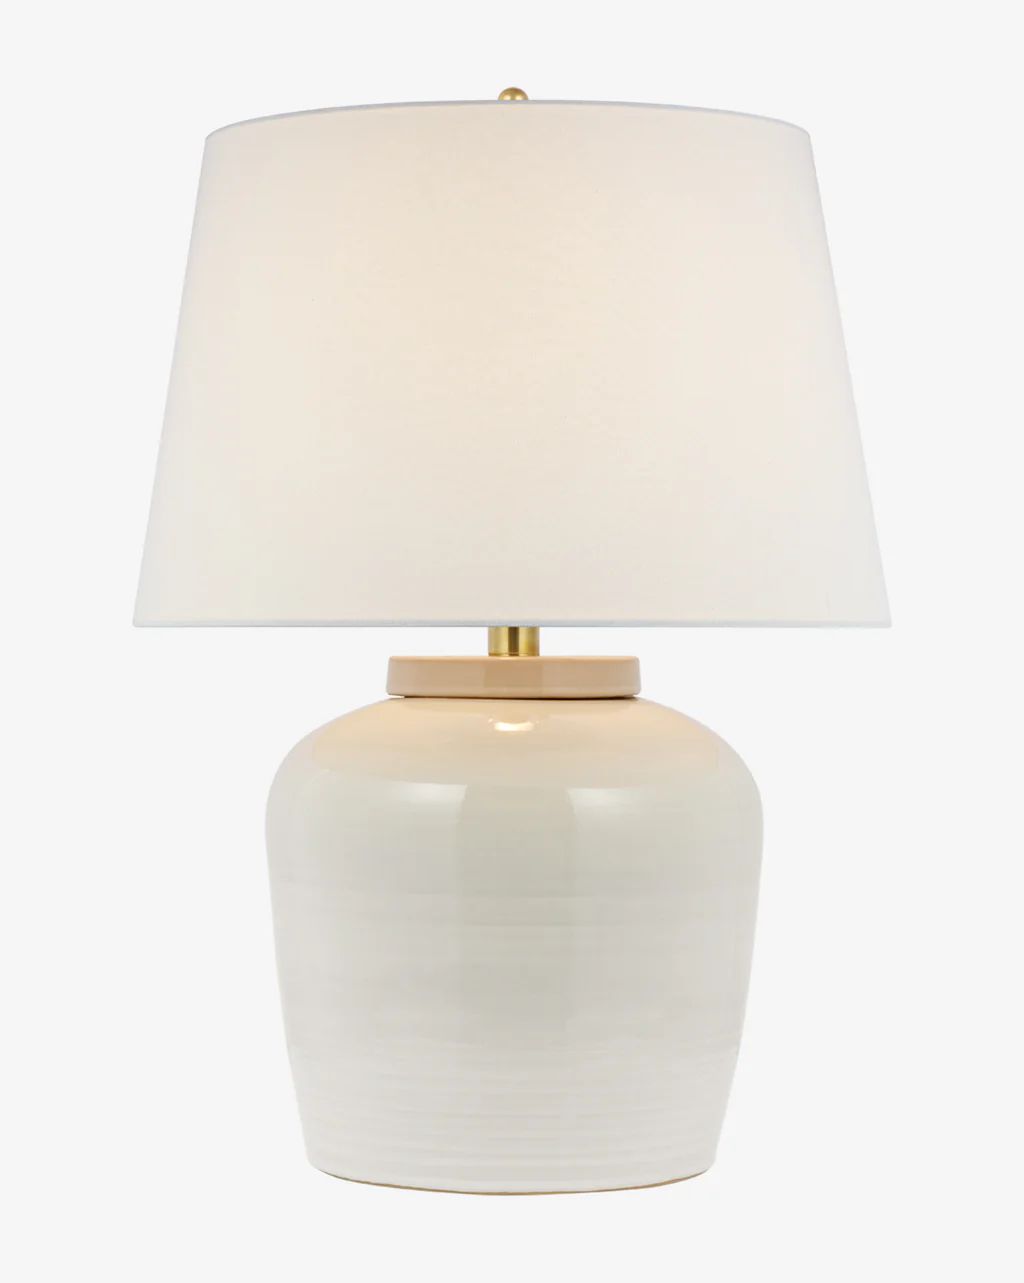 Nora Table Lamp | McGee & Co.